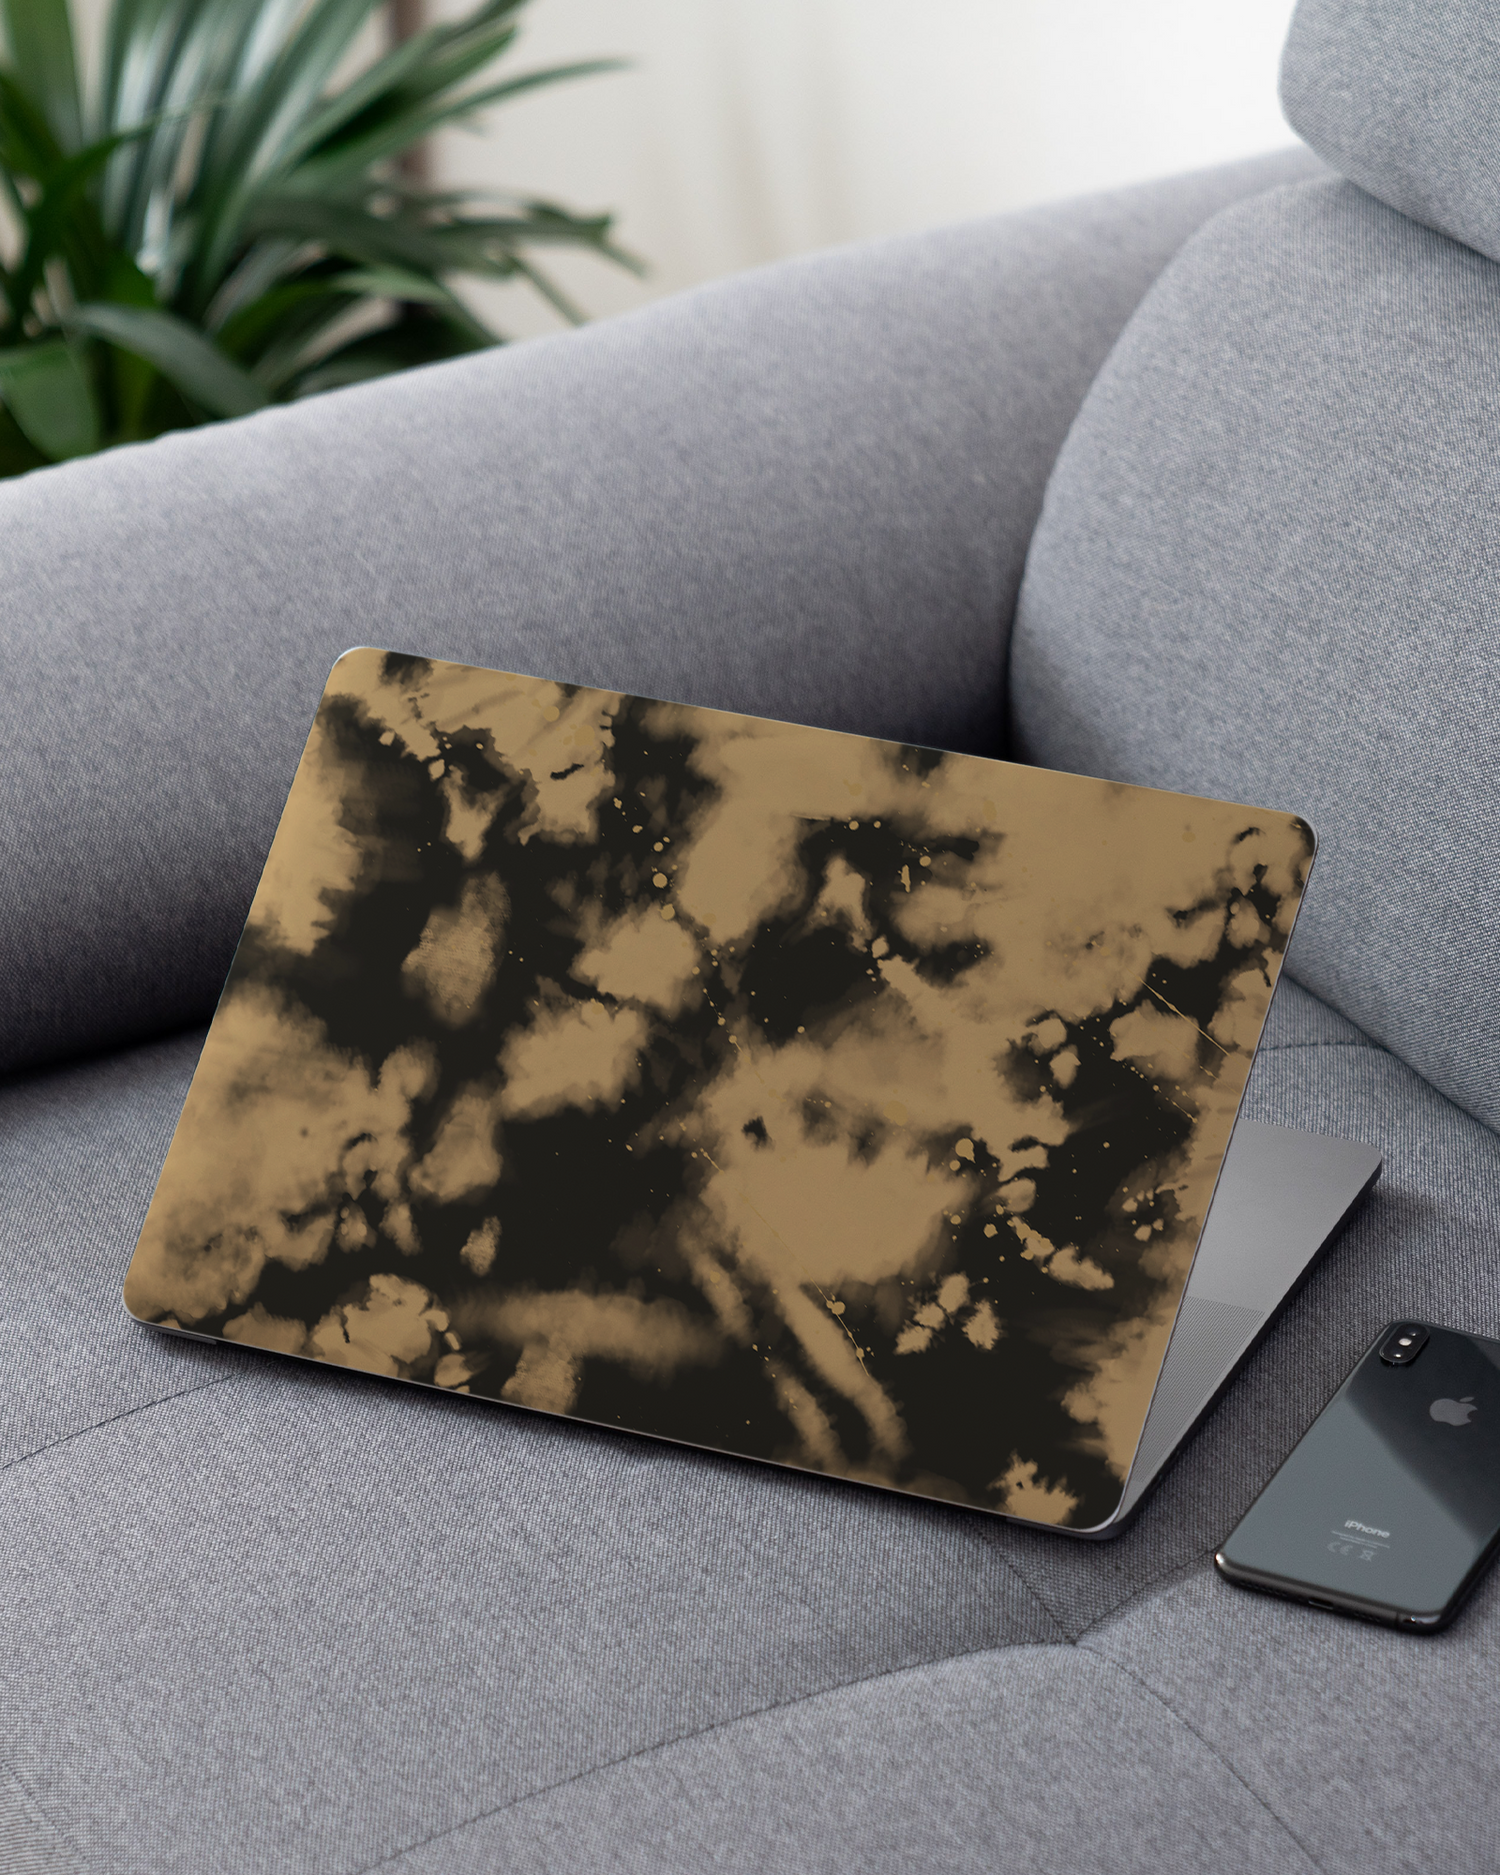 Bleached Laptop Skin for 13 inch Apple MacBooks on a couch